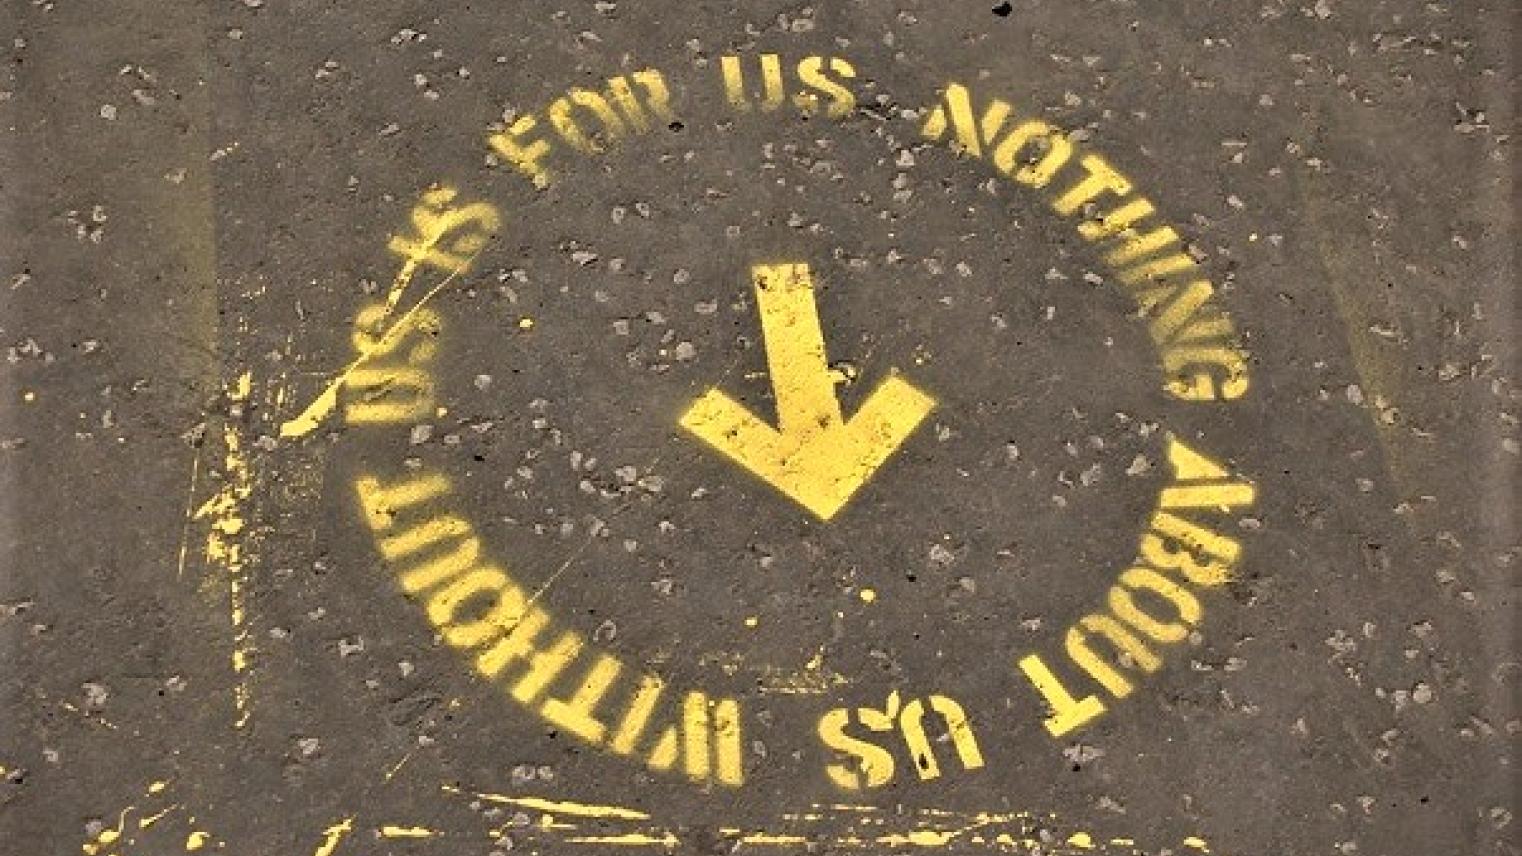 Image of street art stencil: “Nothing about us without us is for us” from public art event of the same name in Glasgow, Scotland, by t s Beall and many others from https://flic.kr/p/dv5FgK, used under CC BY-NC-SA 2.0 DEED licence